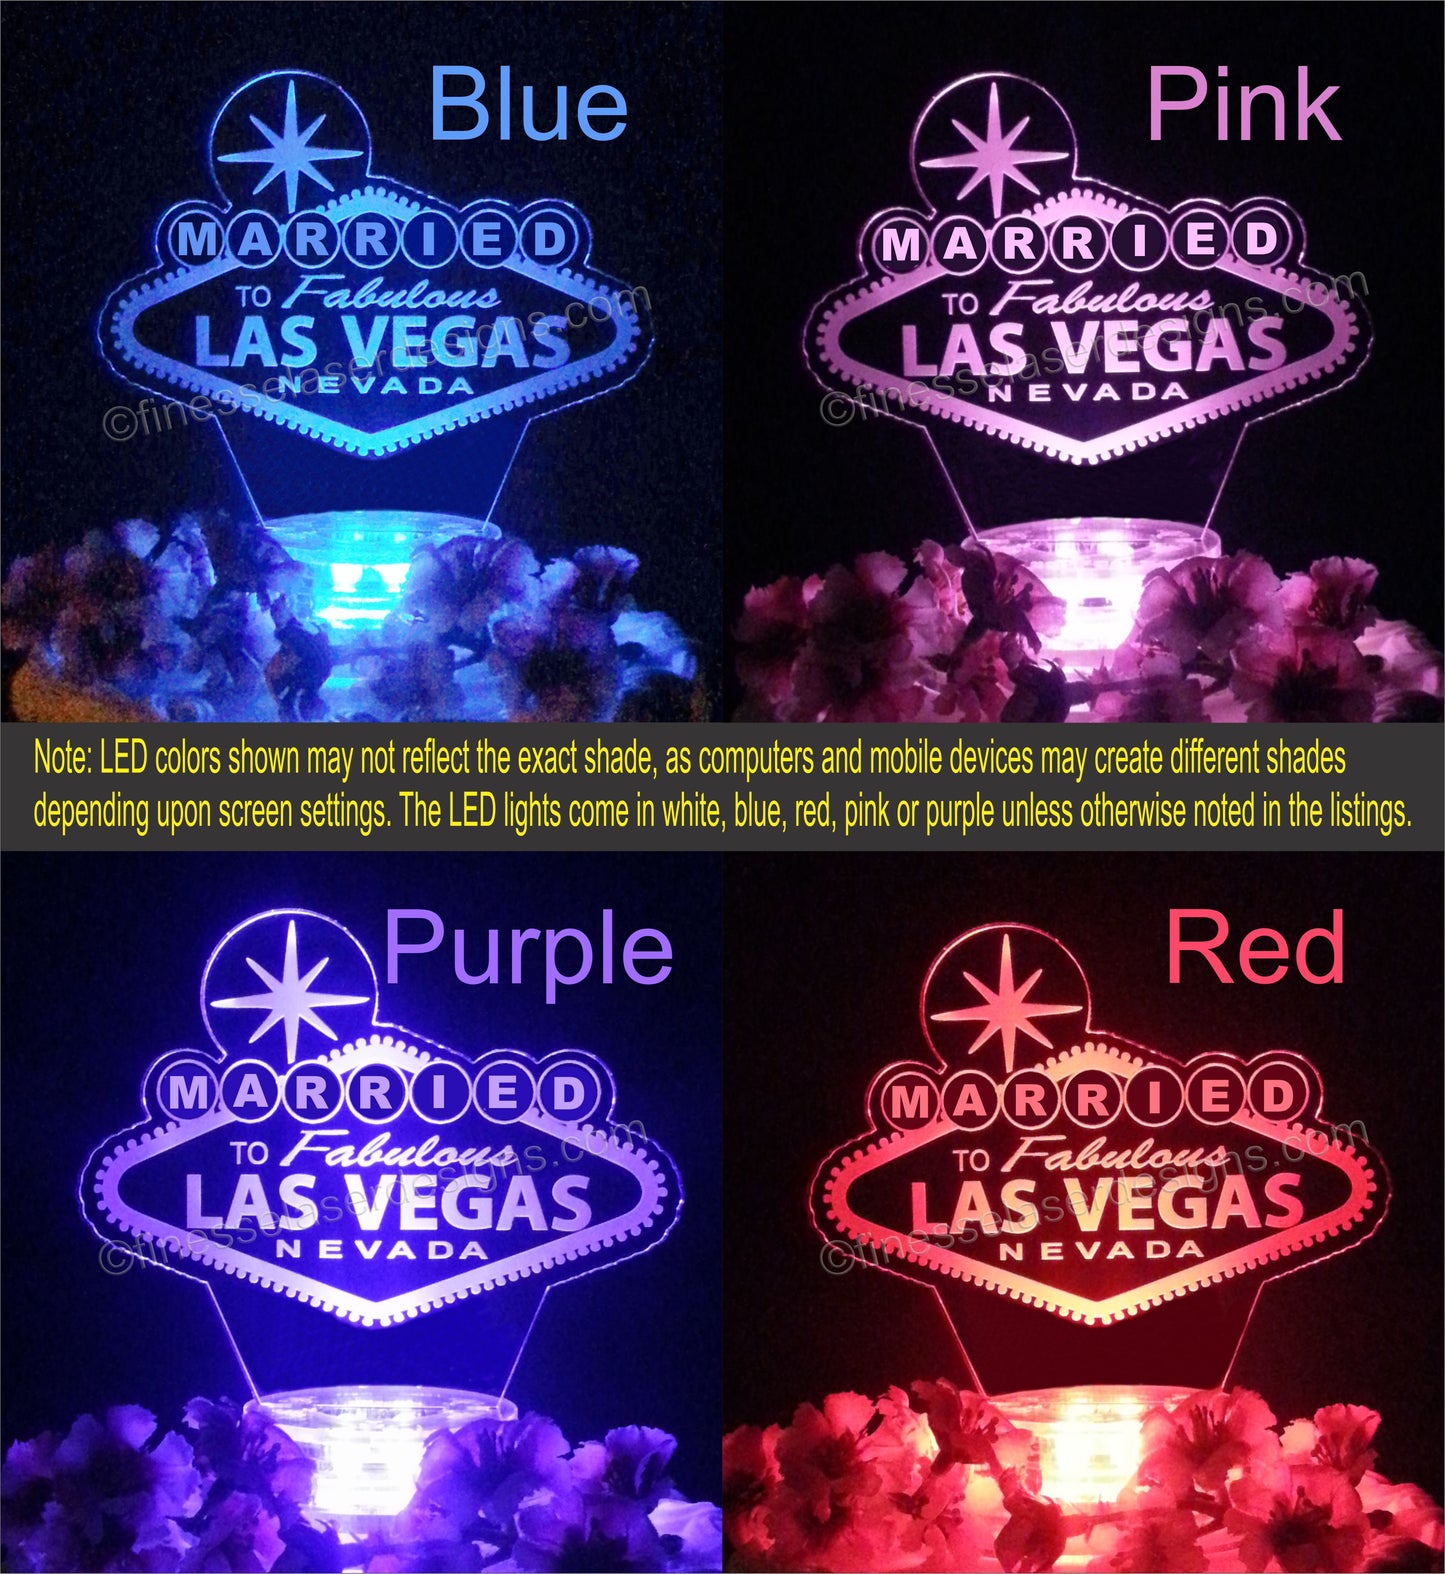 Lighted Married in Las Vegas cake topper shown in blue, pink, purple and red lights